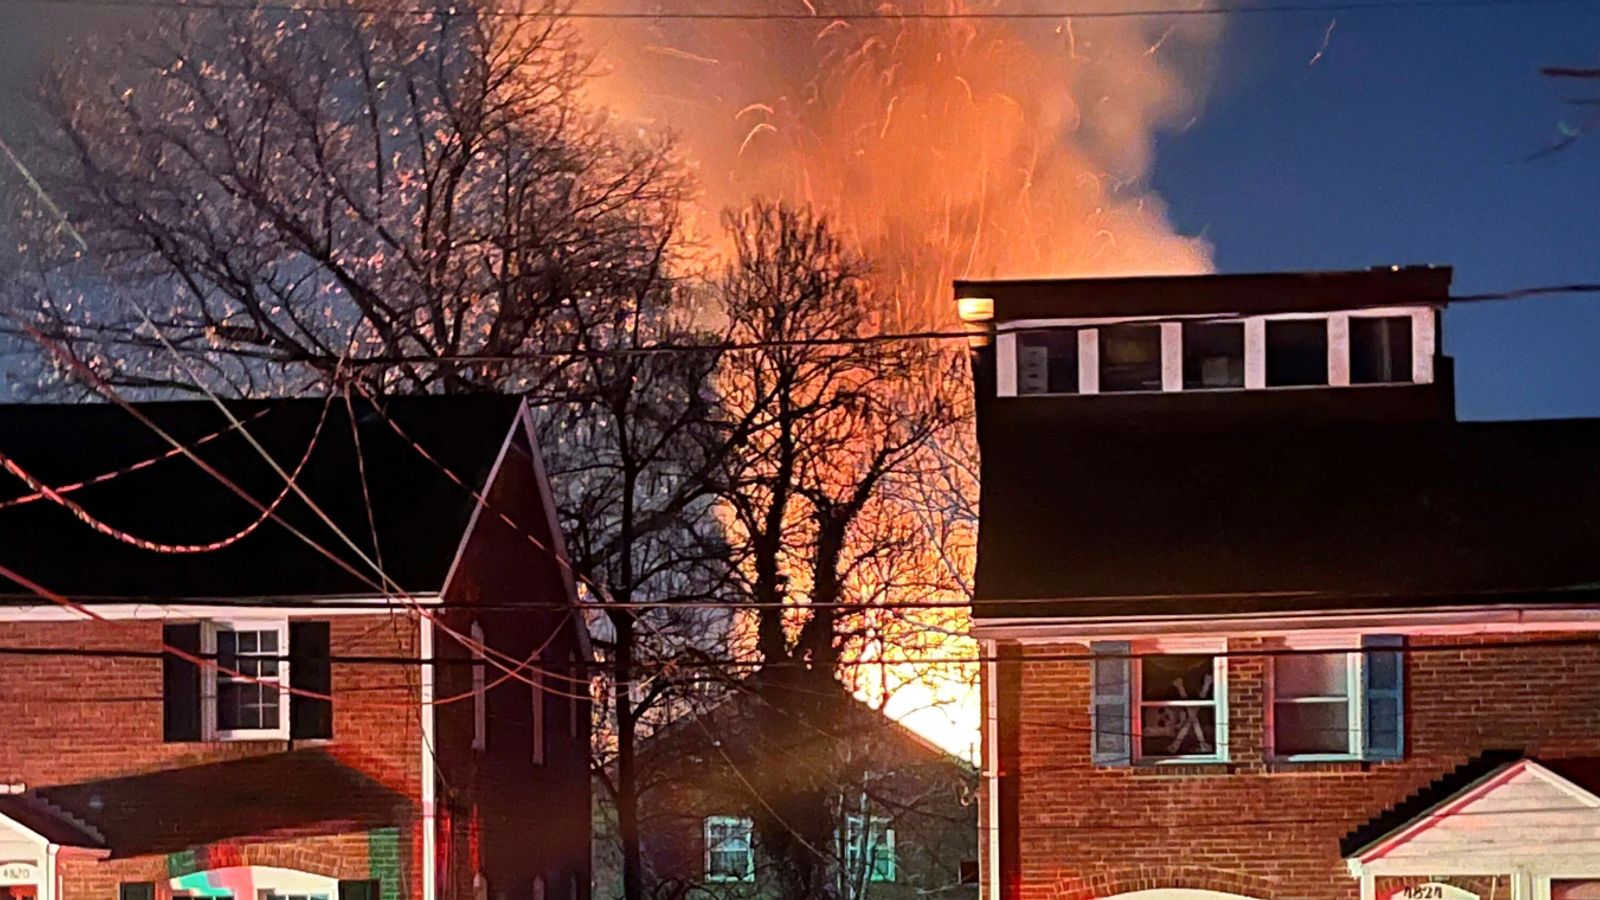 House explodes in Virginia as police surround armed suspect inside